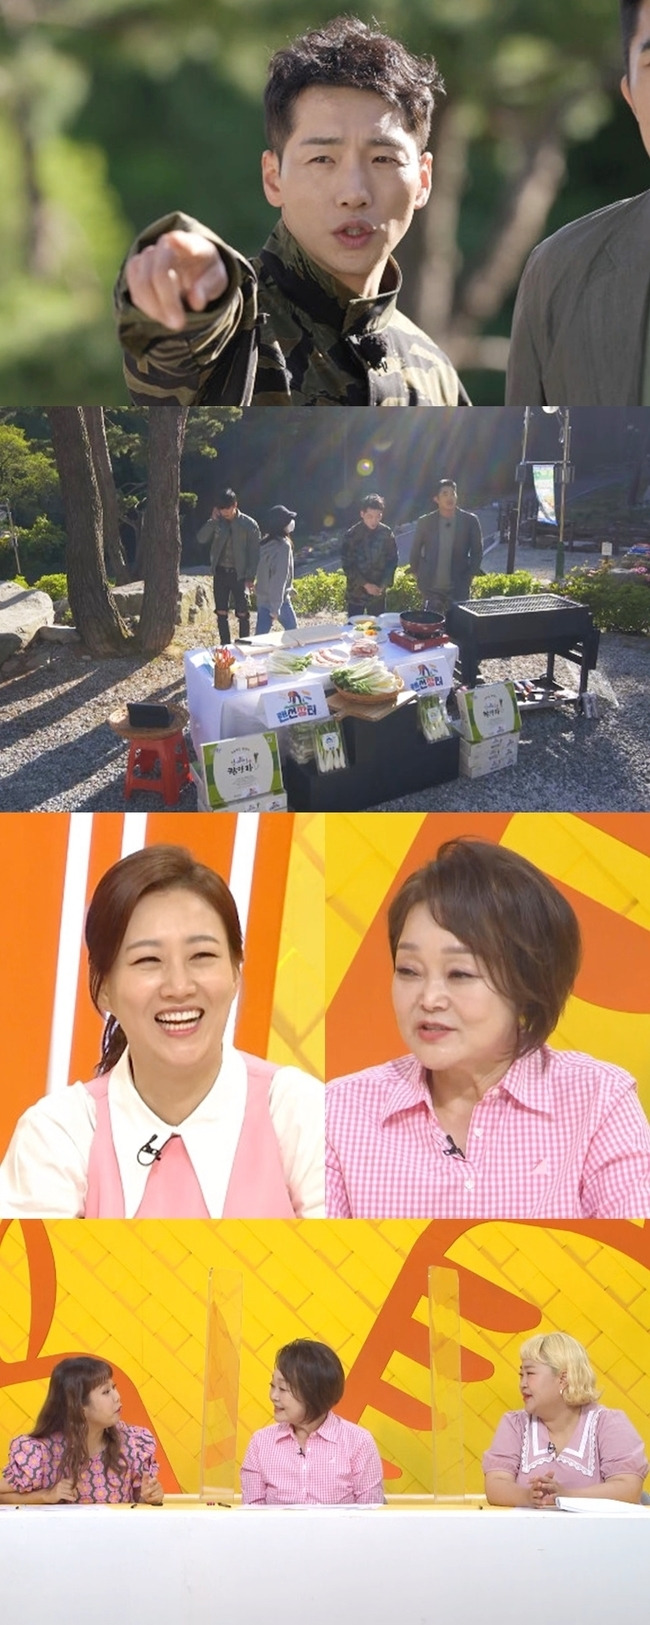 The Hamyangpa team and the Wakame team will have a concessionless sales war.On the KBS 2TV entertainment program Online Market (directed by Son Ja-yeon), which will be broadcast at 9:30 p.m. on June 30, Kim Dong-Hyun, Oh Jong-hyuk, Park Gun and Kim Min-kyung, Hong Yoon-hwa and Lee Hye-jung, who are not in charge of introducing Hamyangpa and Wakame, are depicted respectively.Last week, Trot senior Jang Yun-jeong, Park Gun, who was selling Jinsung and Gwangyang plums, prepares for Love Live! Commerce meticulously to overcome the pain of bitter defeat.When Jang Yun-jeong sent a brilliant look to Park Gun, who led the scene as well as checking the sales statement, he said, I learned and came to Donghyun to tell him.However, Kim Dong-Hyun is Love Live!Referring to the number of viewers accessing Commerce, he appeals to viewers to buy, saying, What are the rest of you doing?When Park Gun came back to the back of the farmers s shoulders and put up a last-minute spurt with the promotion of the Hamyang wave, Jang Yun-jeong said, I raised a tiger baby.